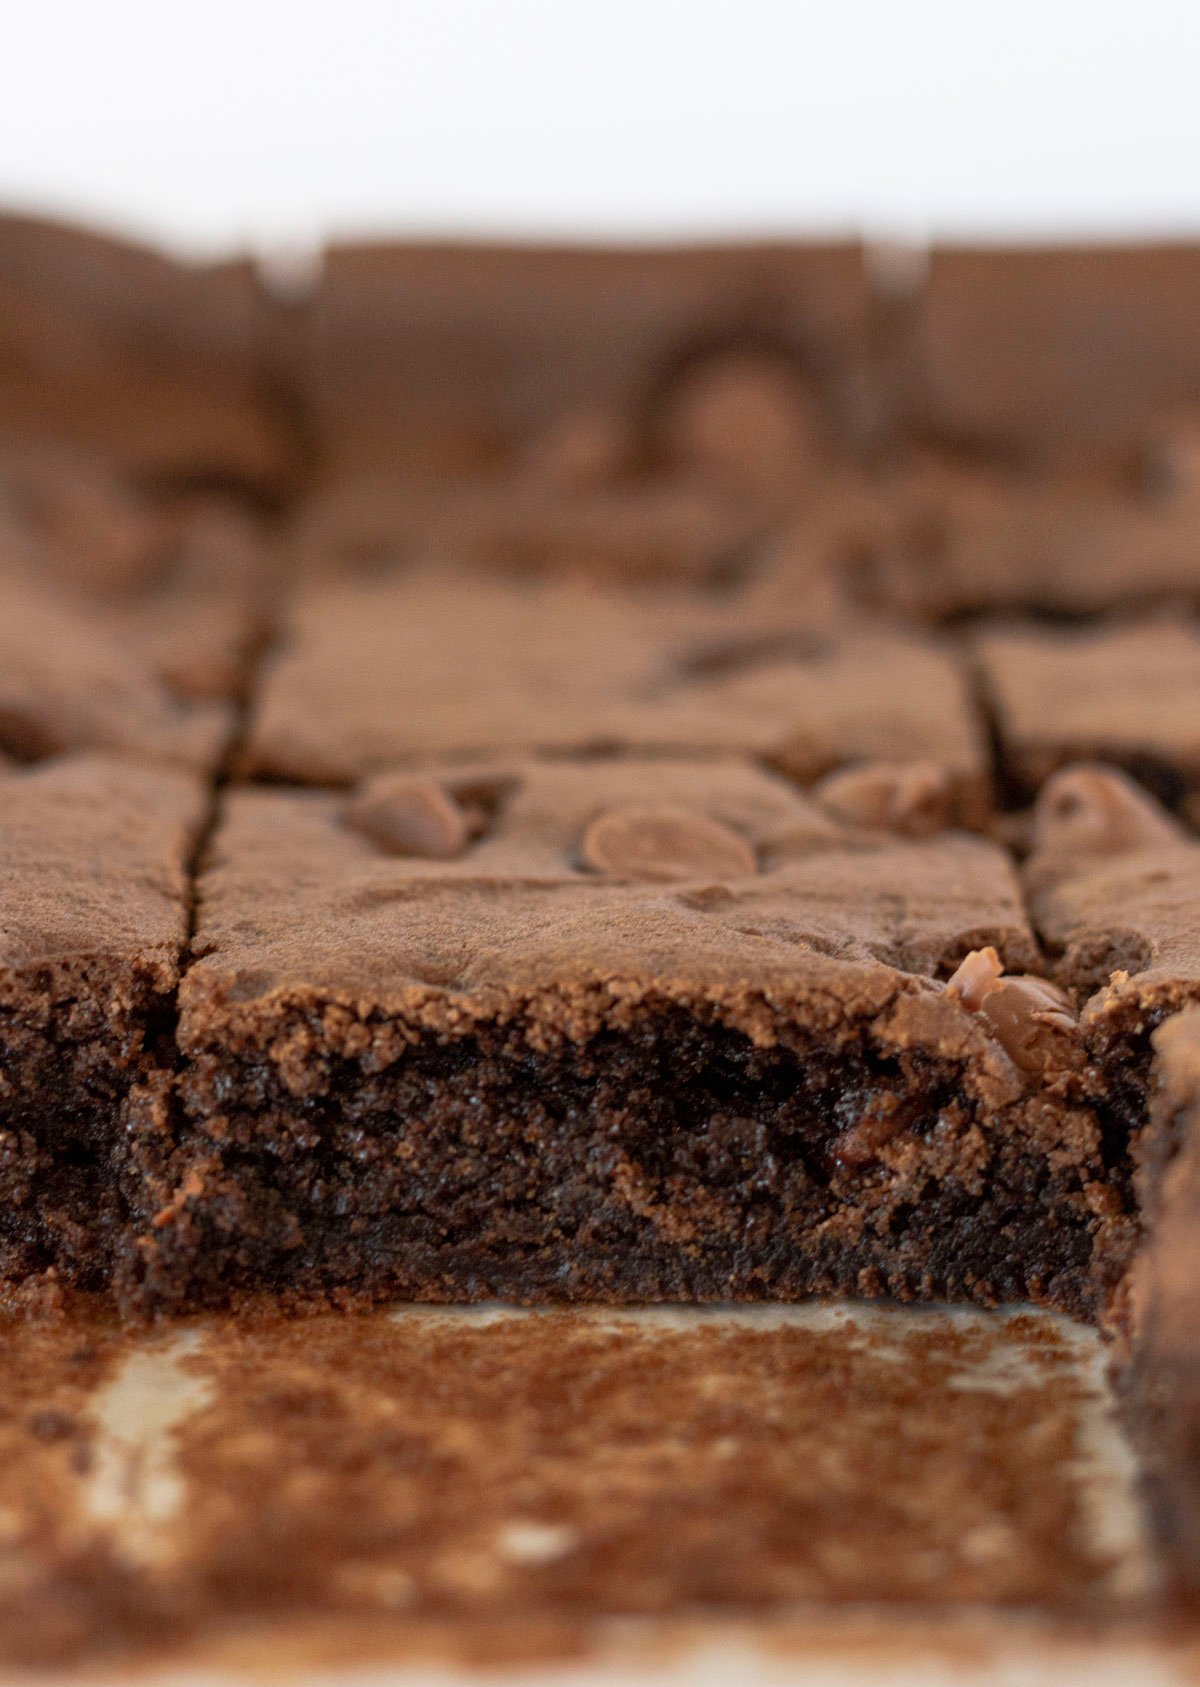 A photo of a cut brownie inside a pan of cake mix brownies.